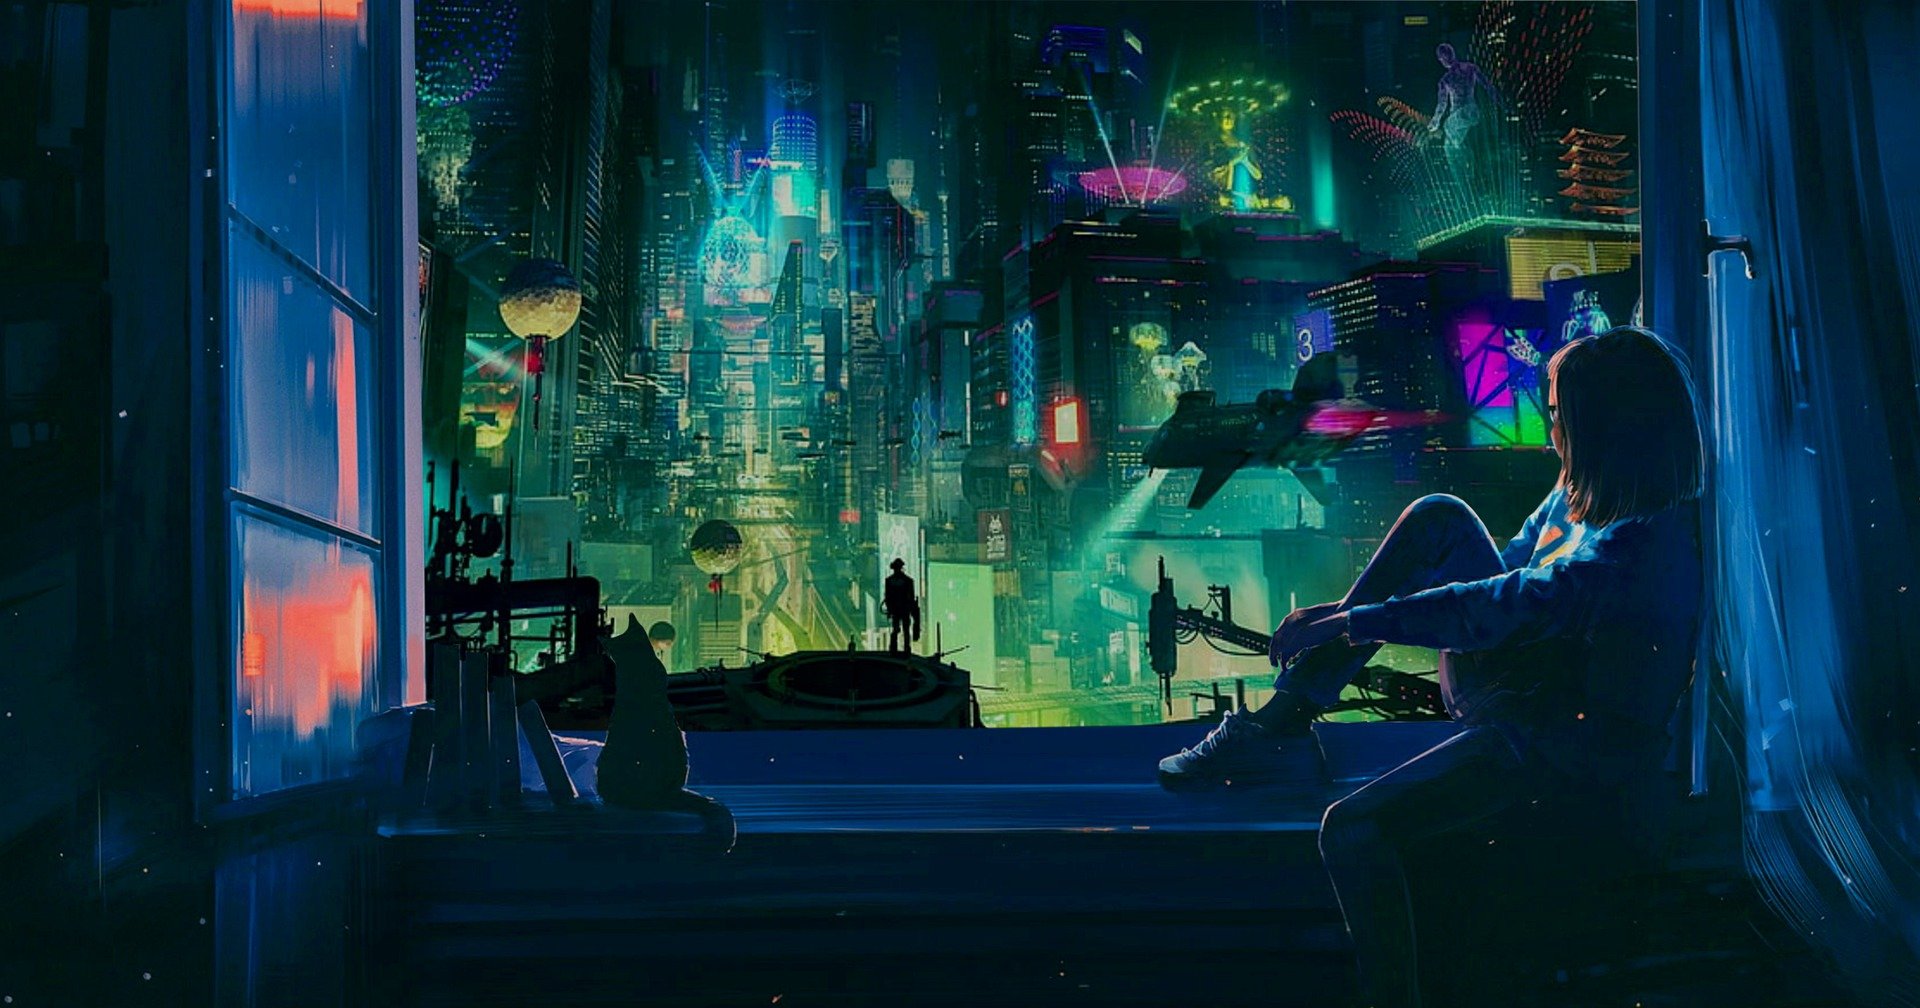 The Best Futuristic Cities in Sci-fi Movies We’d Move to